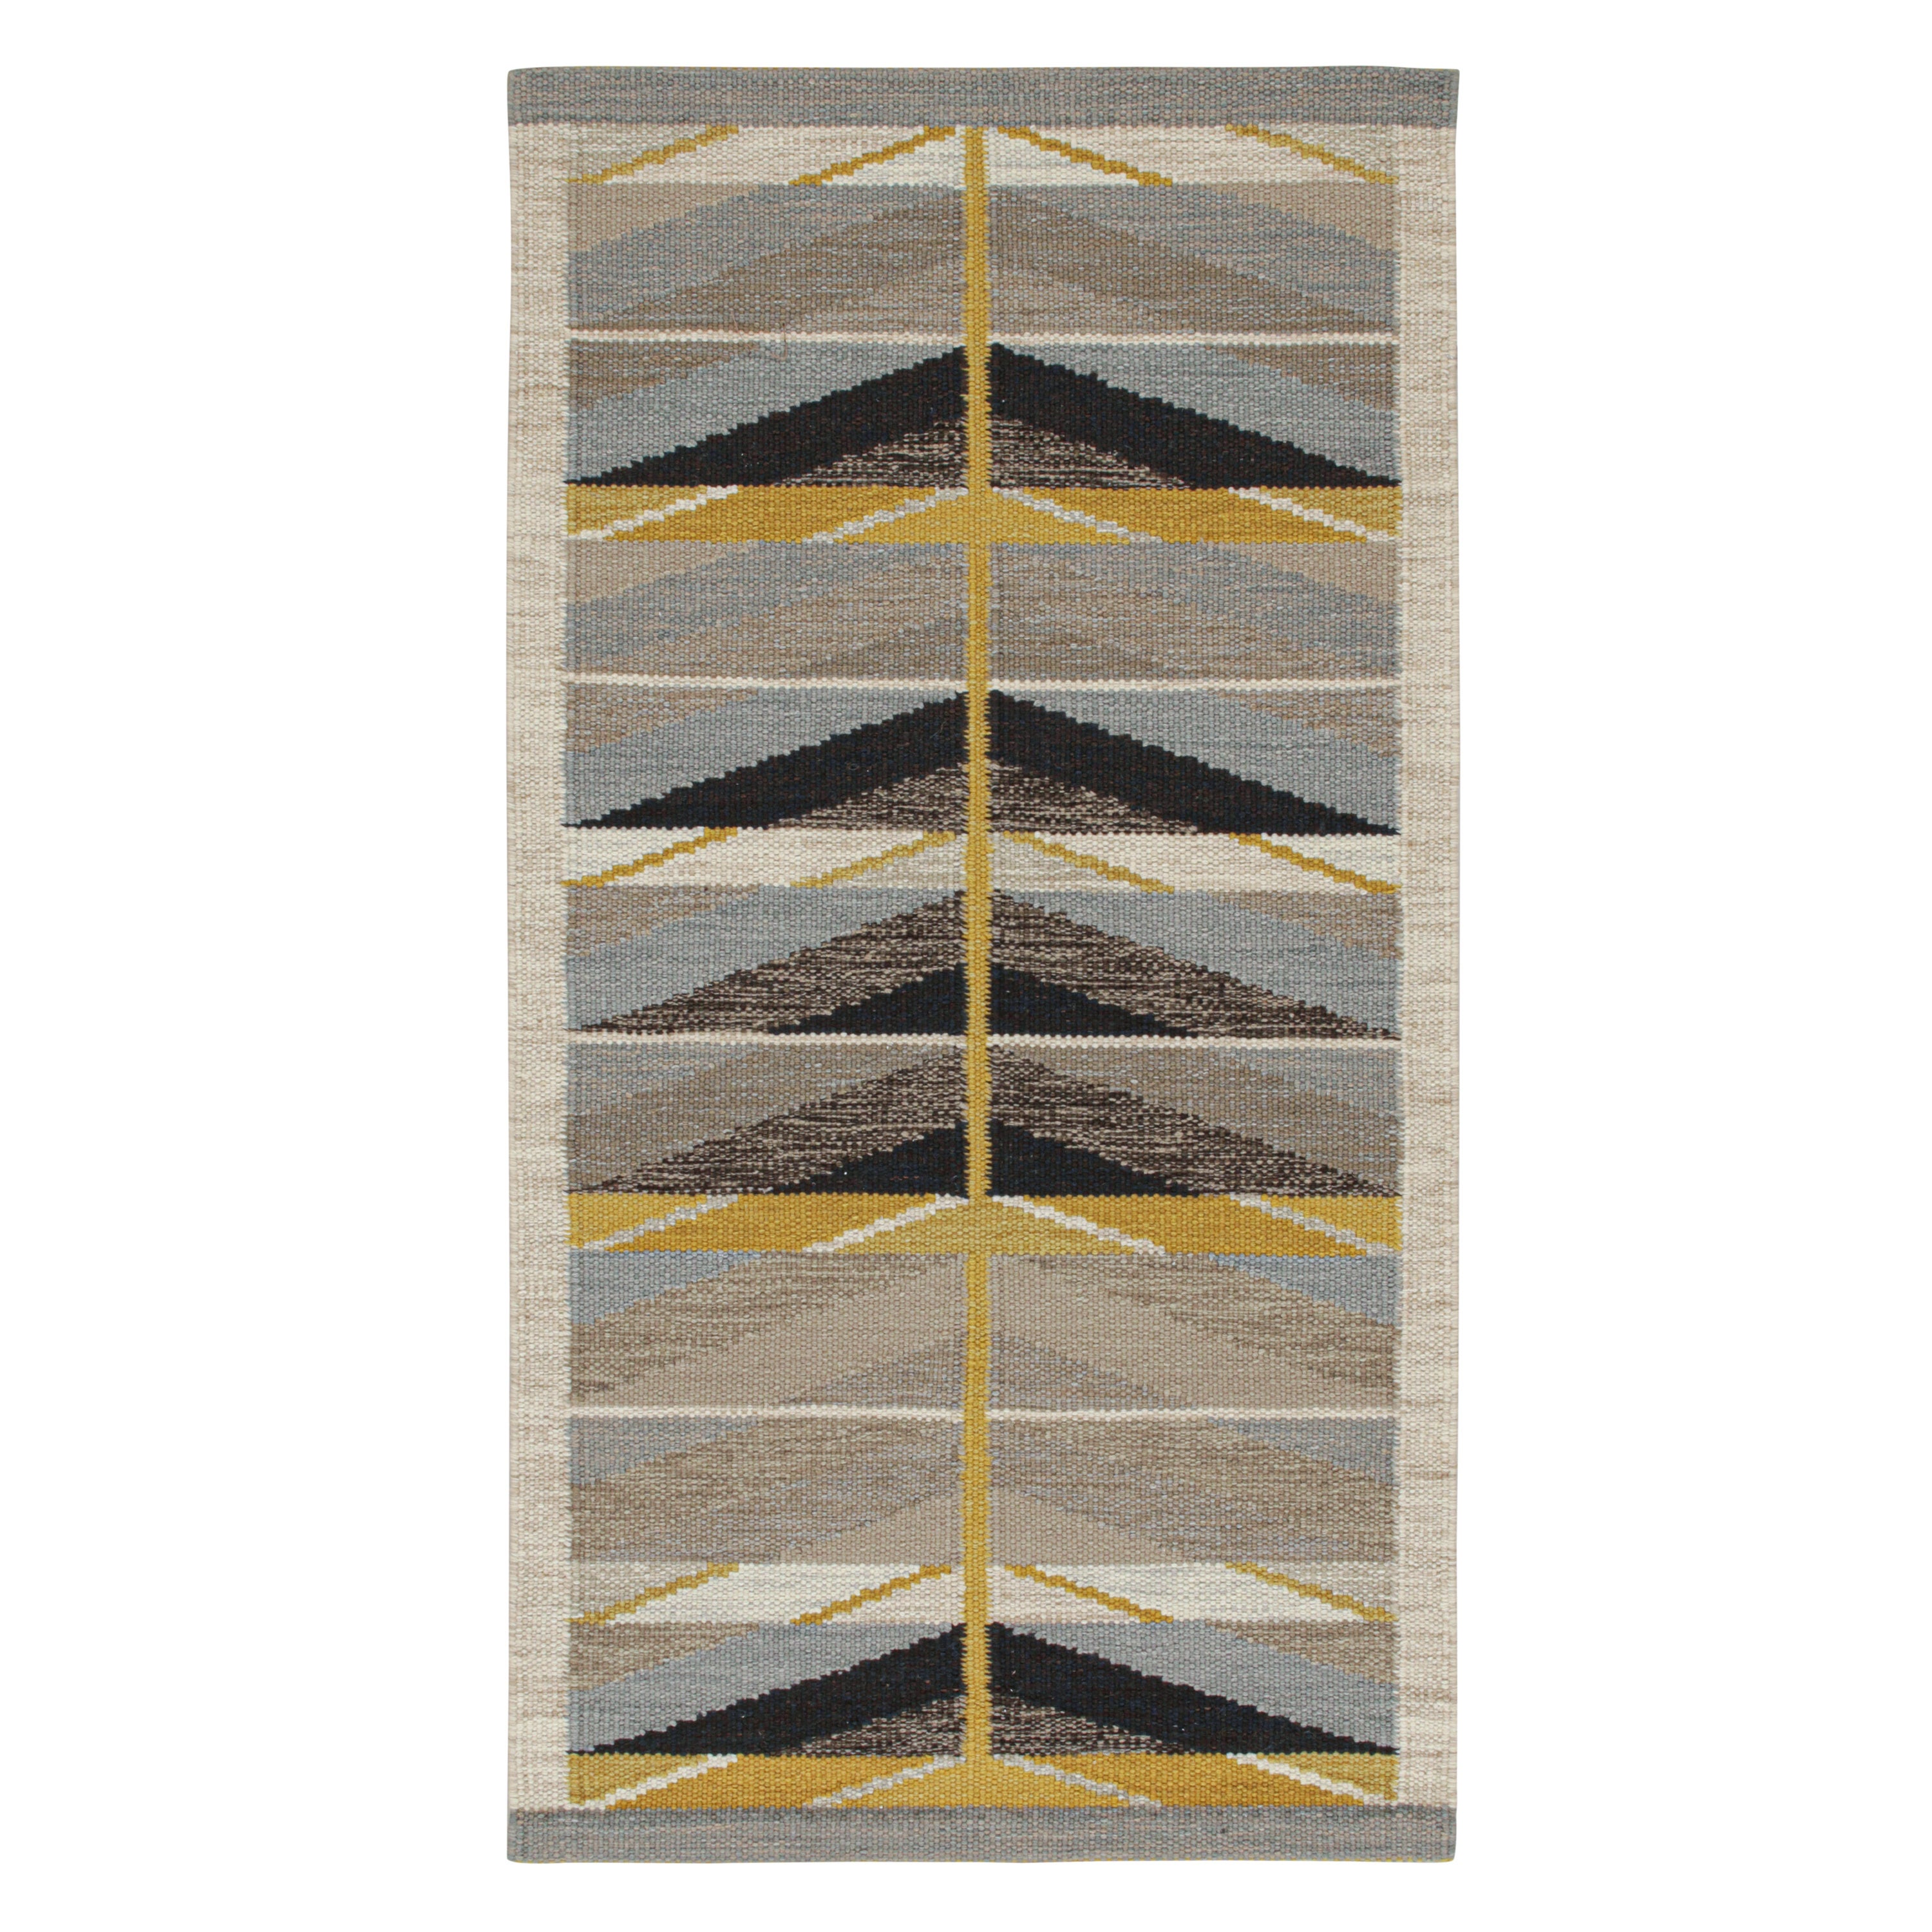 Rug & Kilim’s Scandinavian Style Kilim Runner in Taupe with Geometric Patterns For Sale